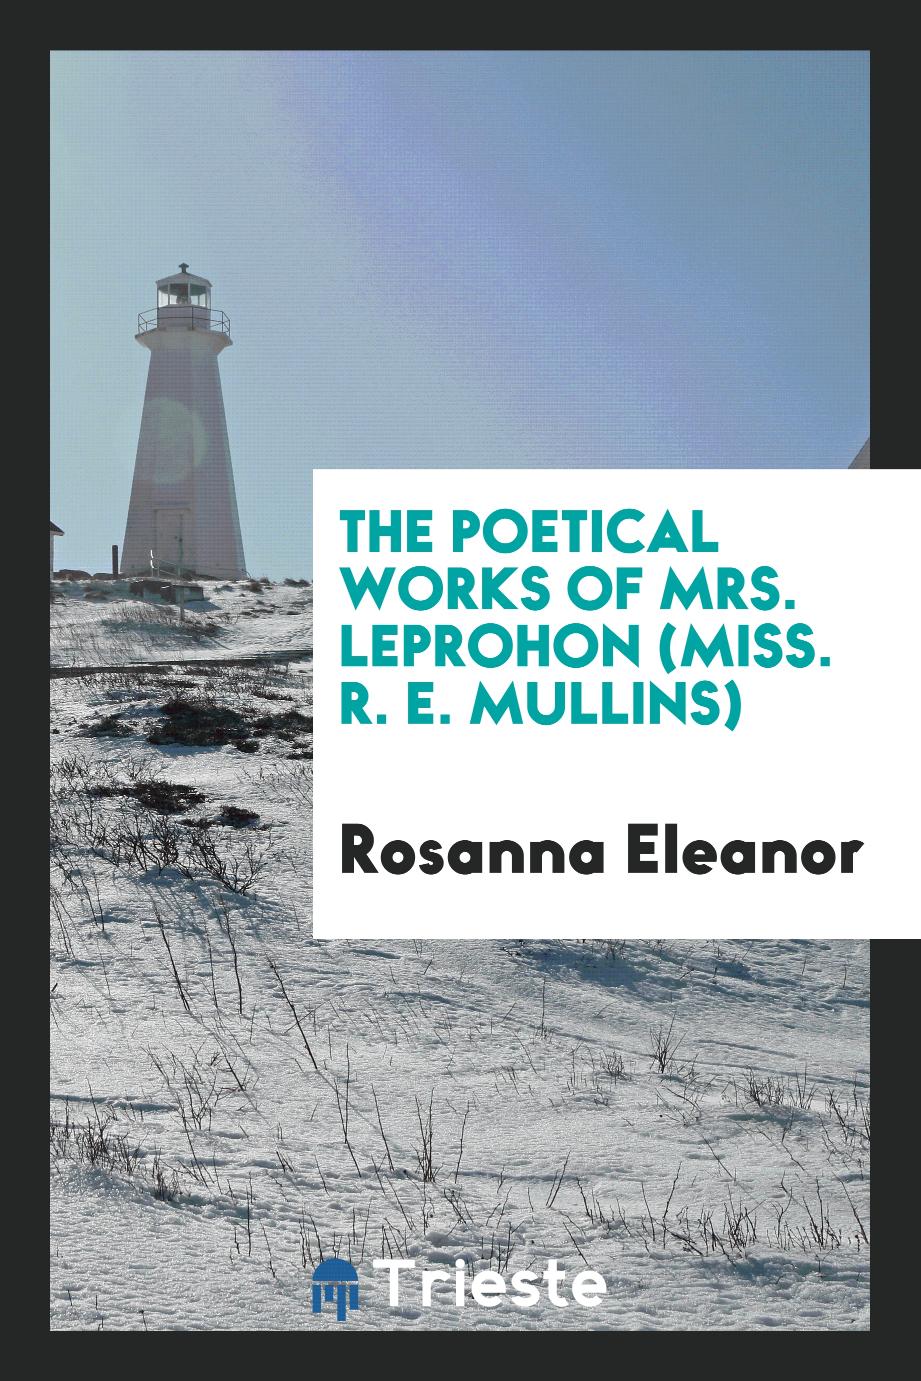 The Poetical Works of Mrs. Leprohon (Miss. R. E. Mullins)